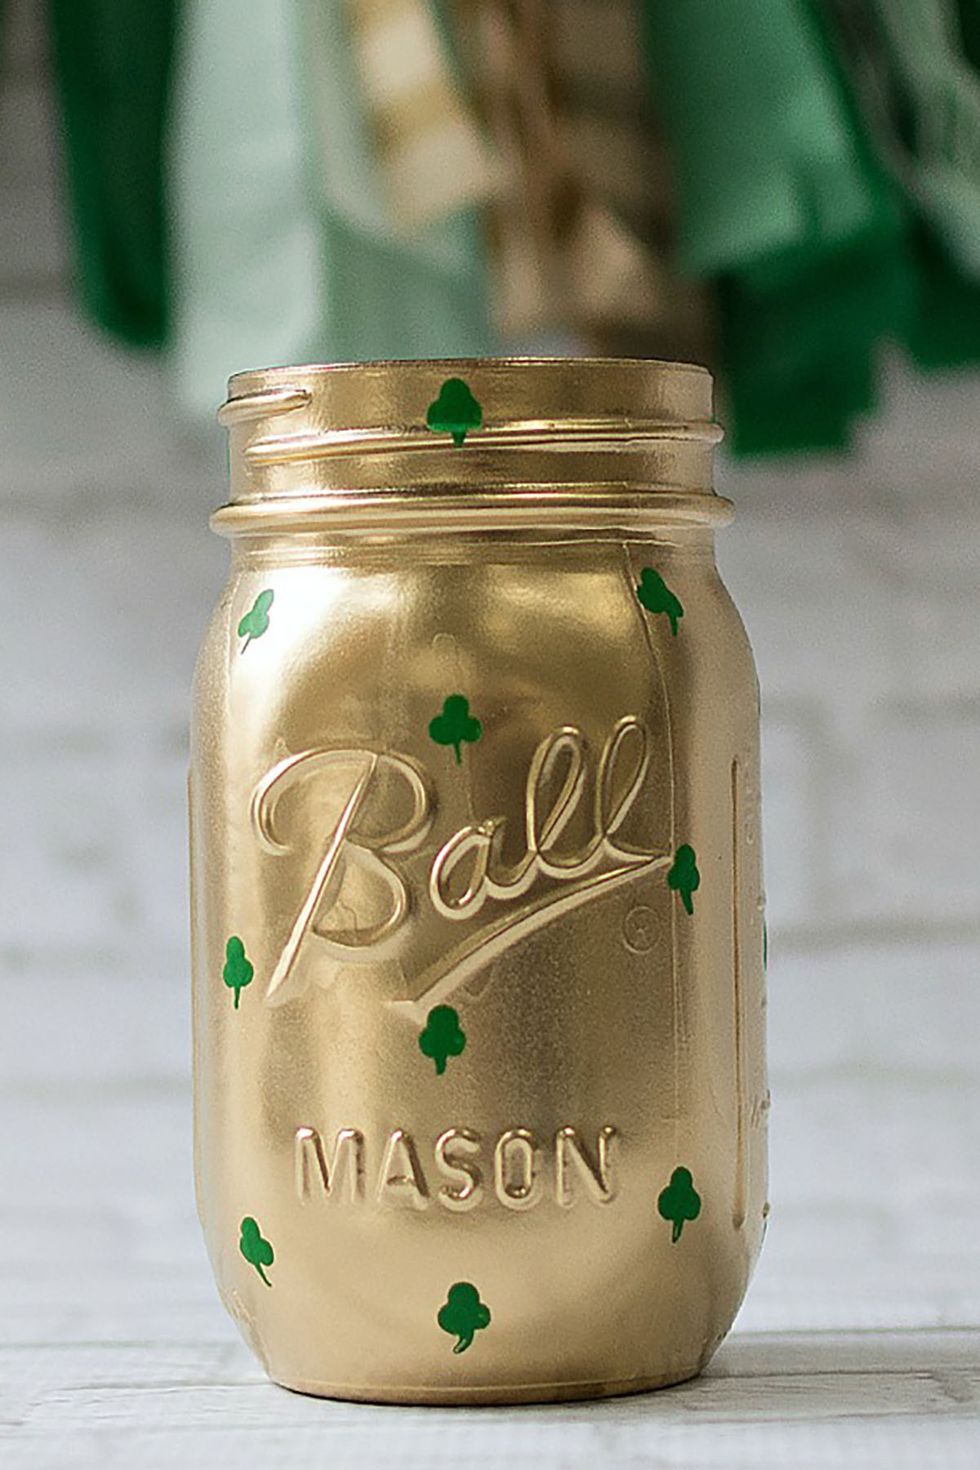 mason jar craft painted gold, decorated with tiny green painted shamrocks, st patrick's day craft for adults